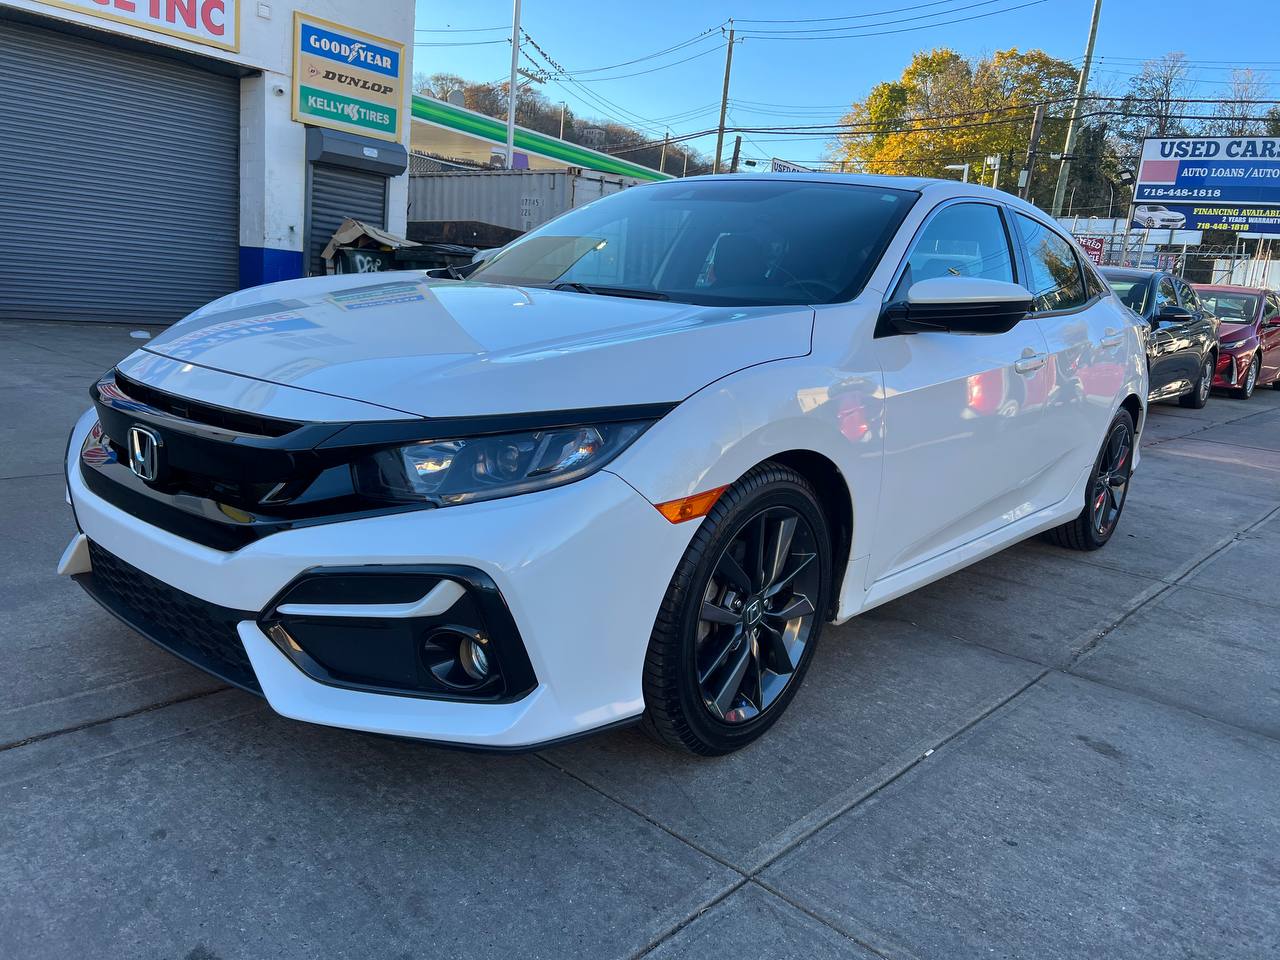 Used Car - 2020 Honda CIVIC EX for Sale in Staten Island, NY